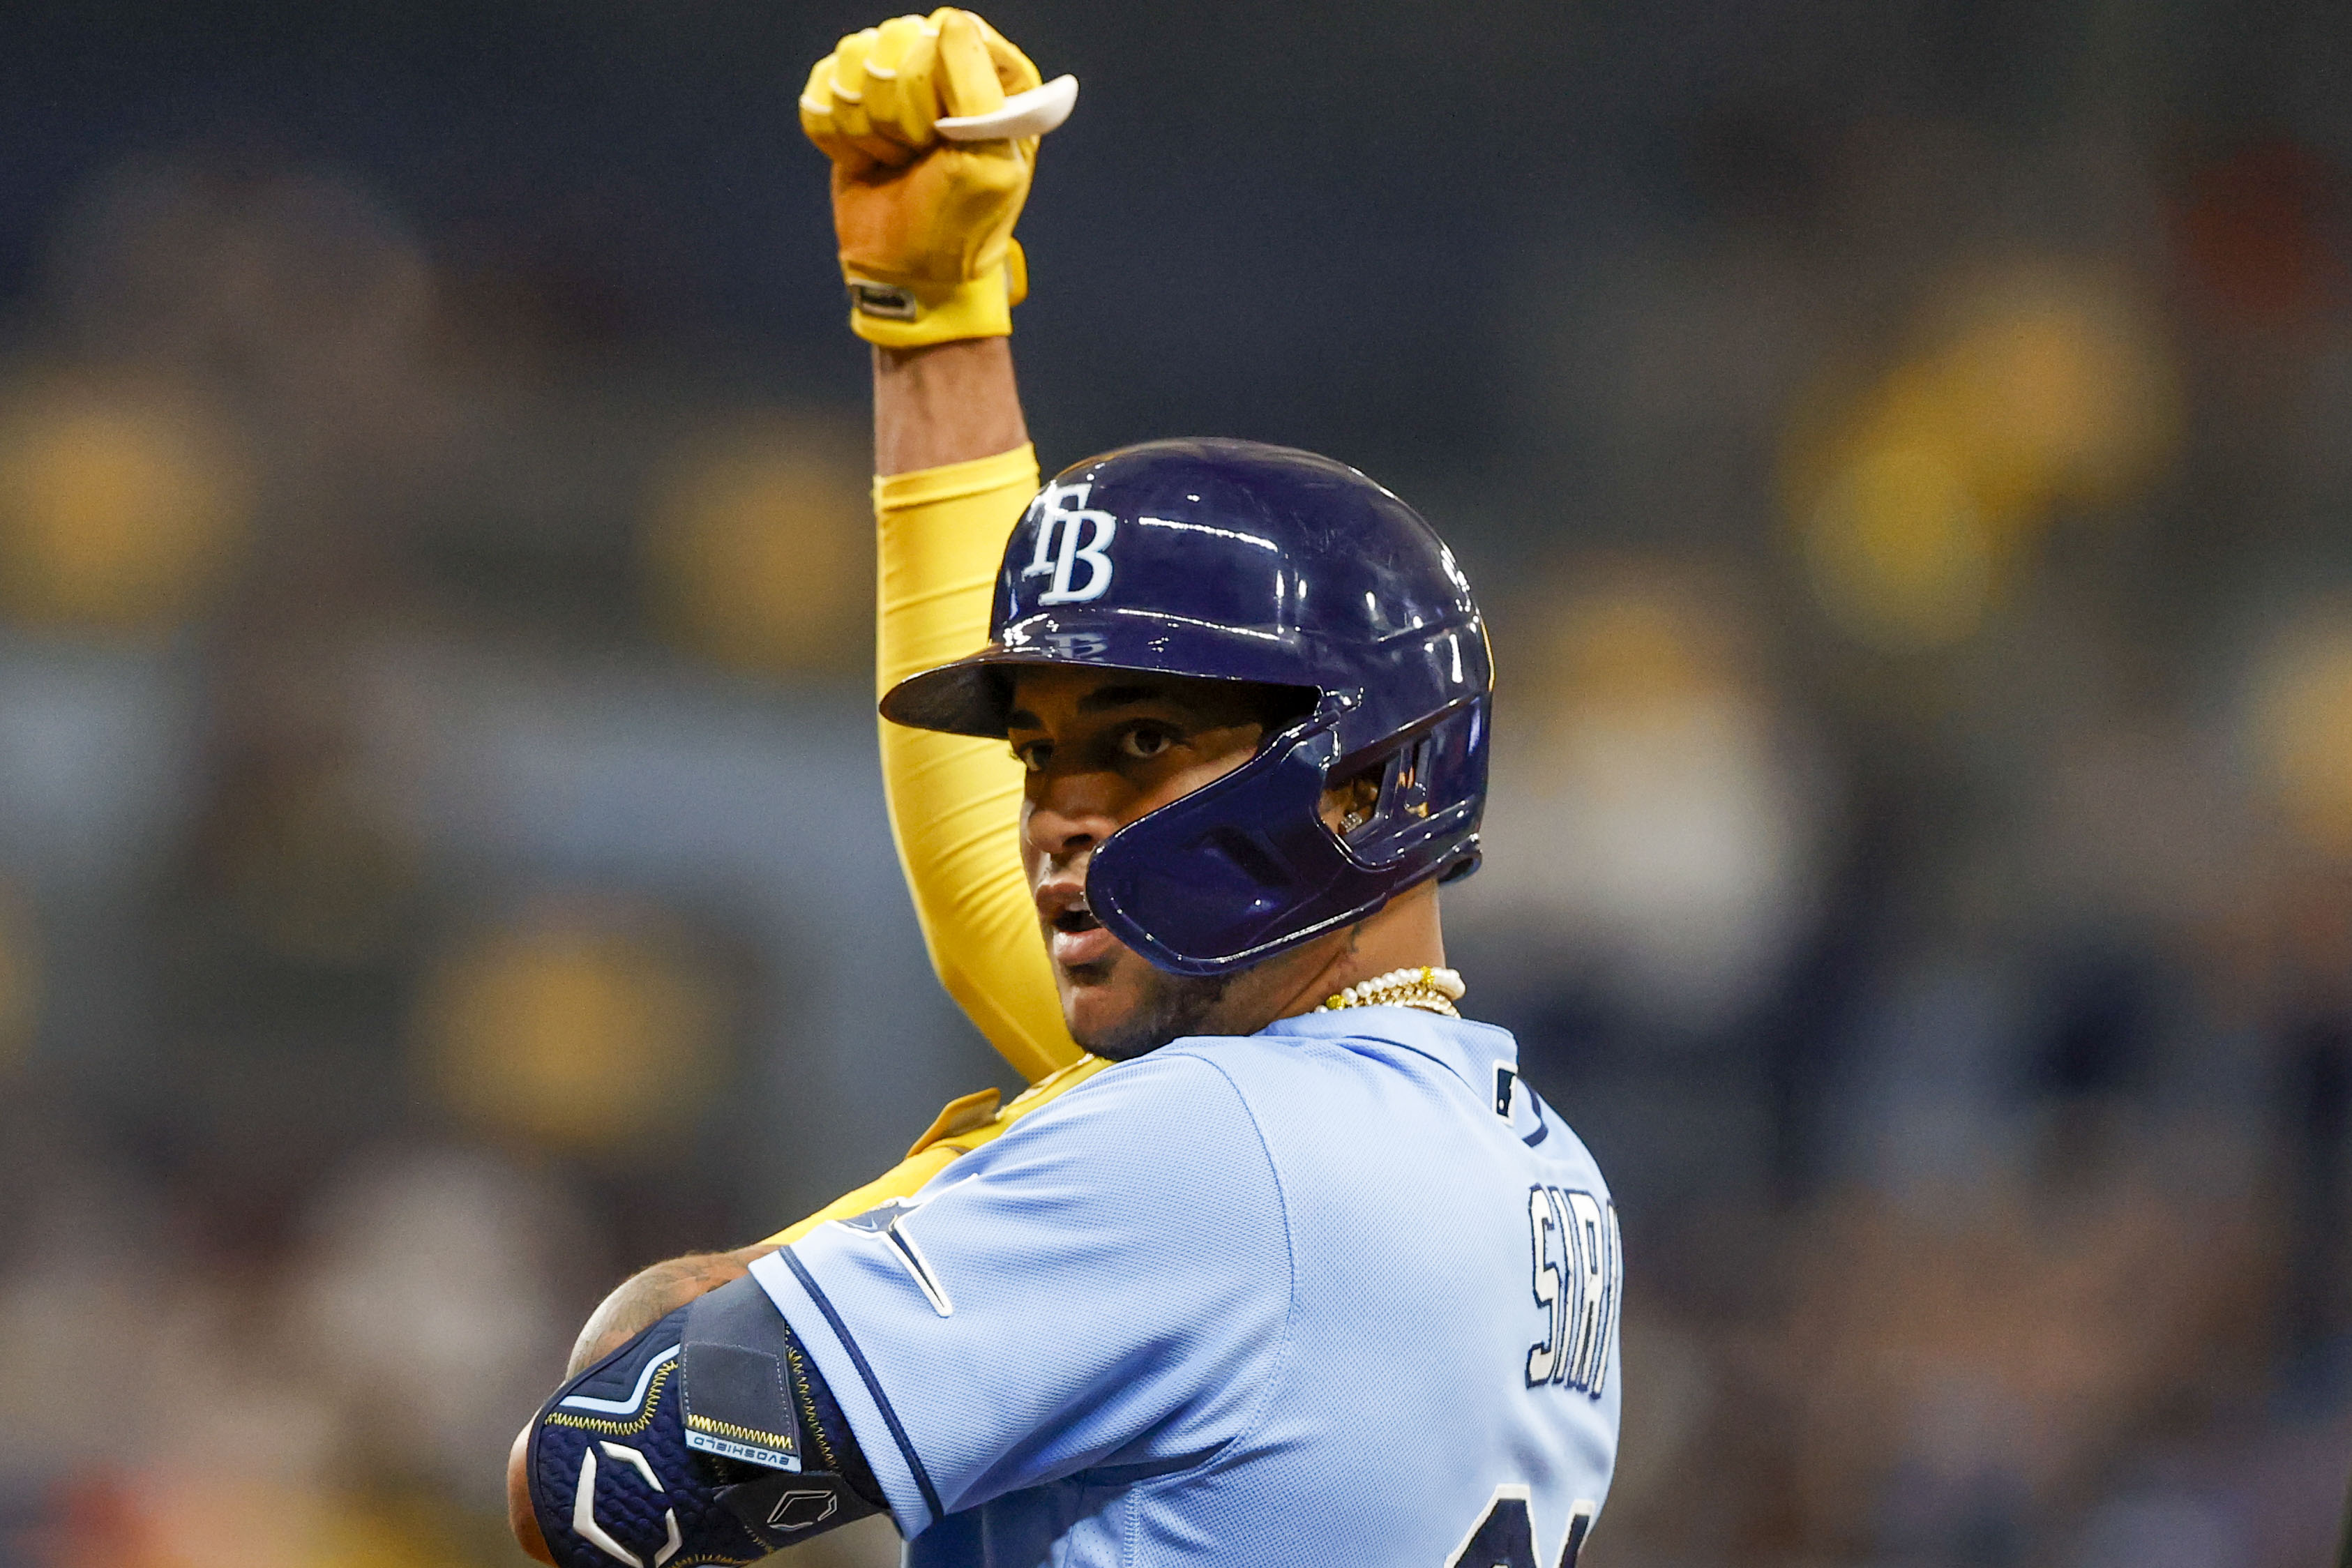 Rays' Jose Siri makes spectacular catches, sometimes with just one hand